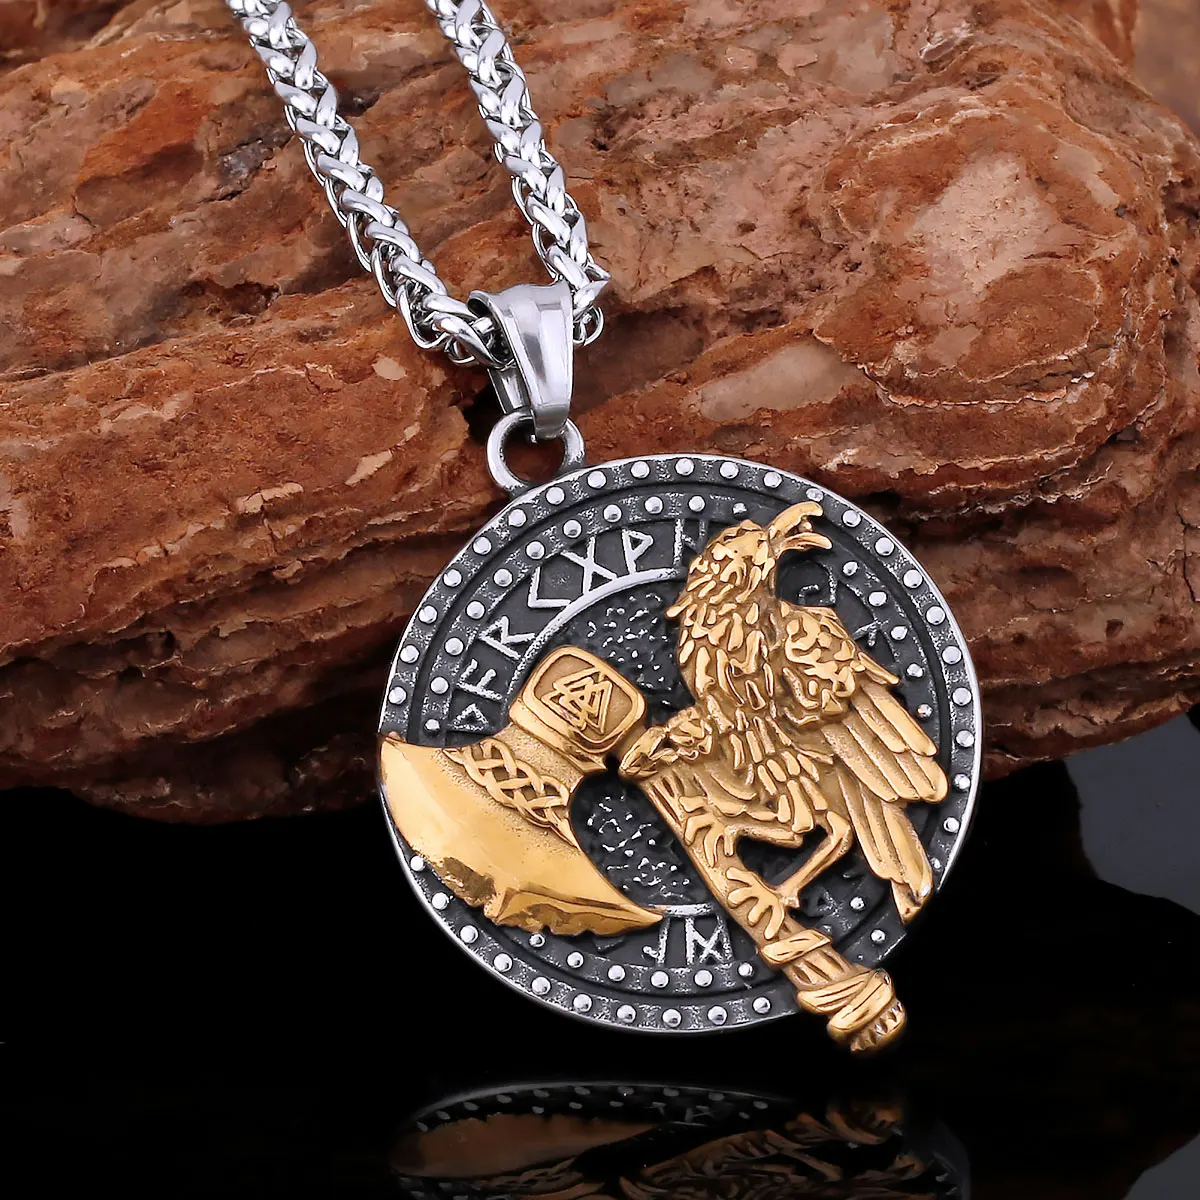 

Exquisite Fashion Stainless Steel Crow Axe Viking Necklace Nordic Men's Animal Amulet Pendant Odin Jewelry Gift Party Dedicated